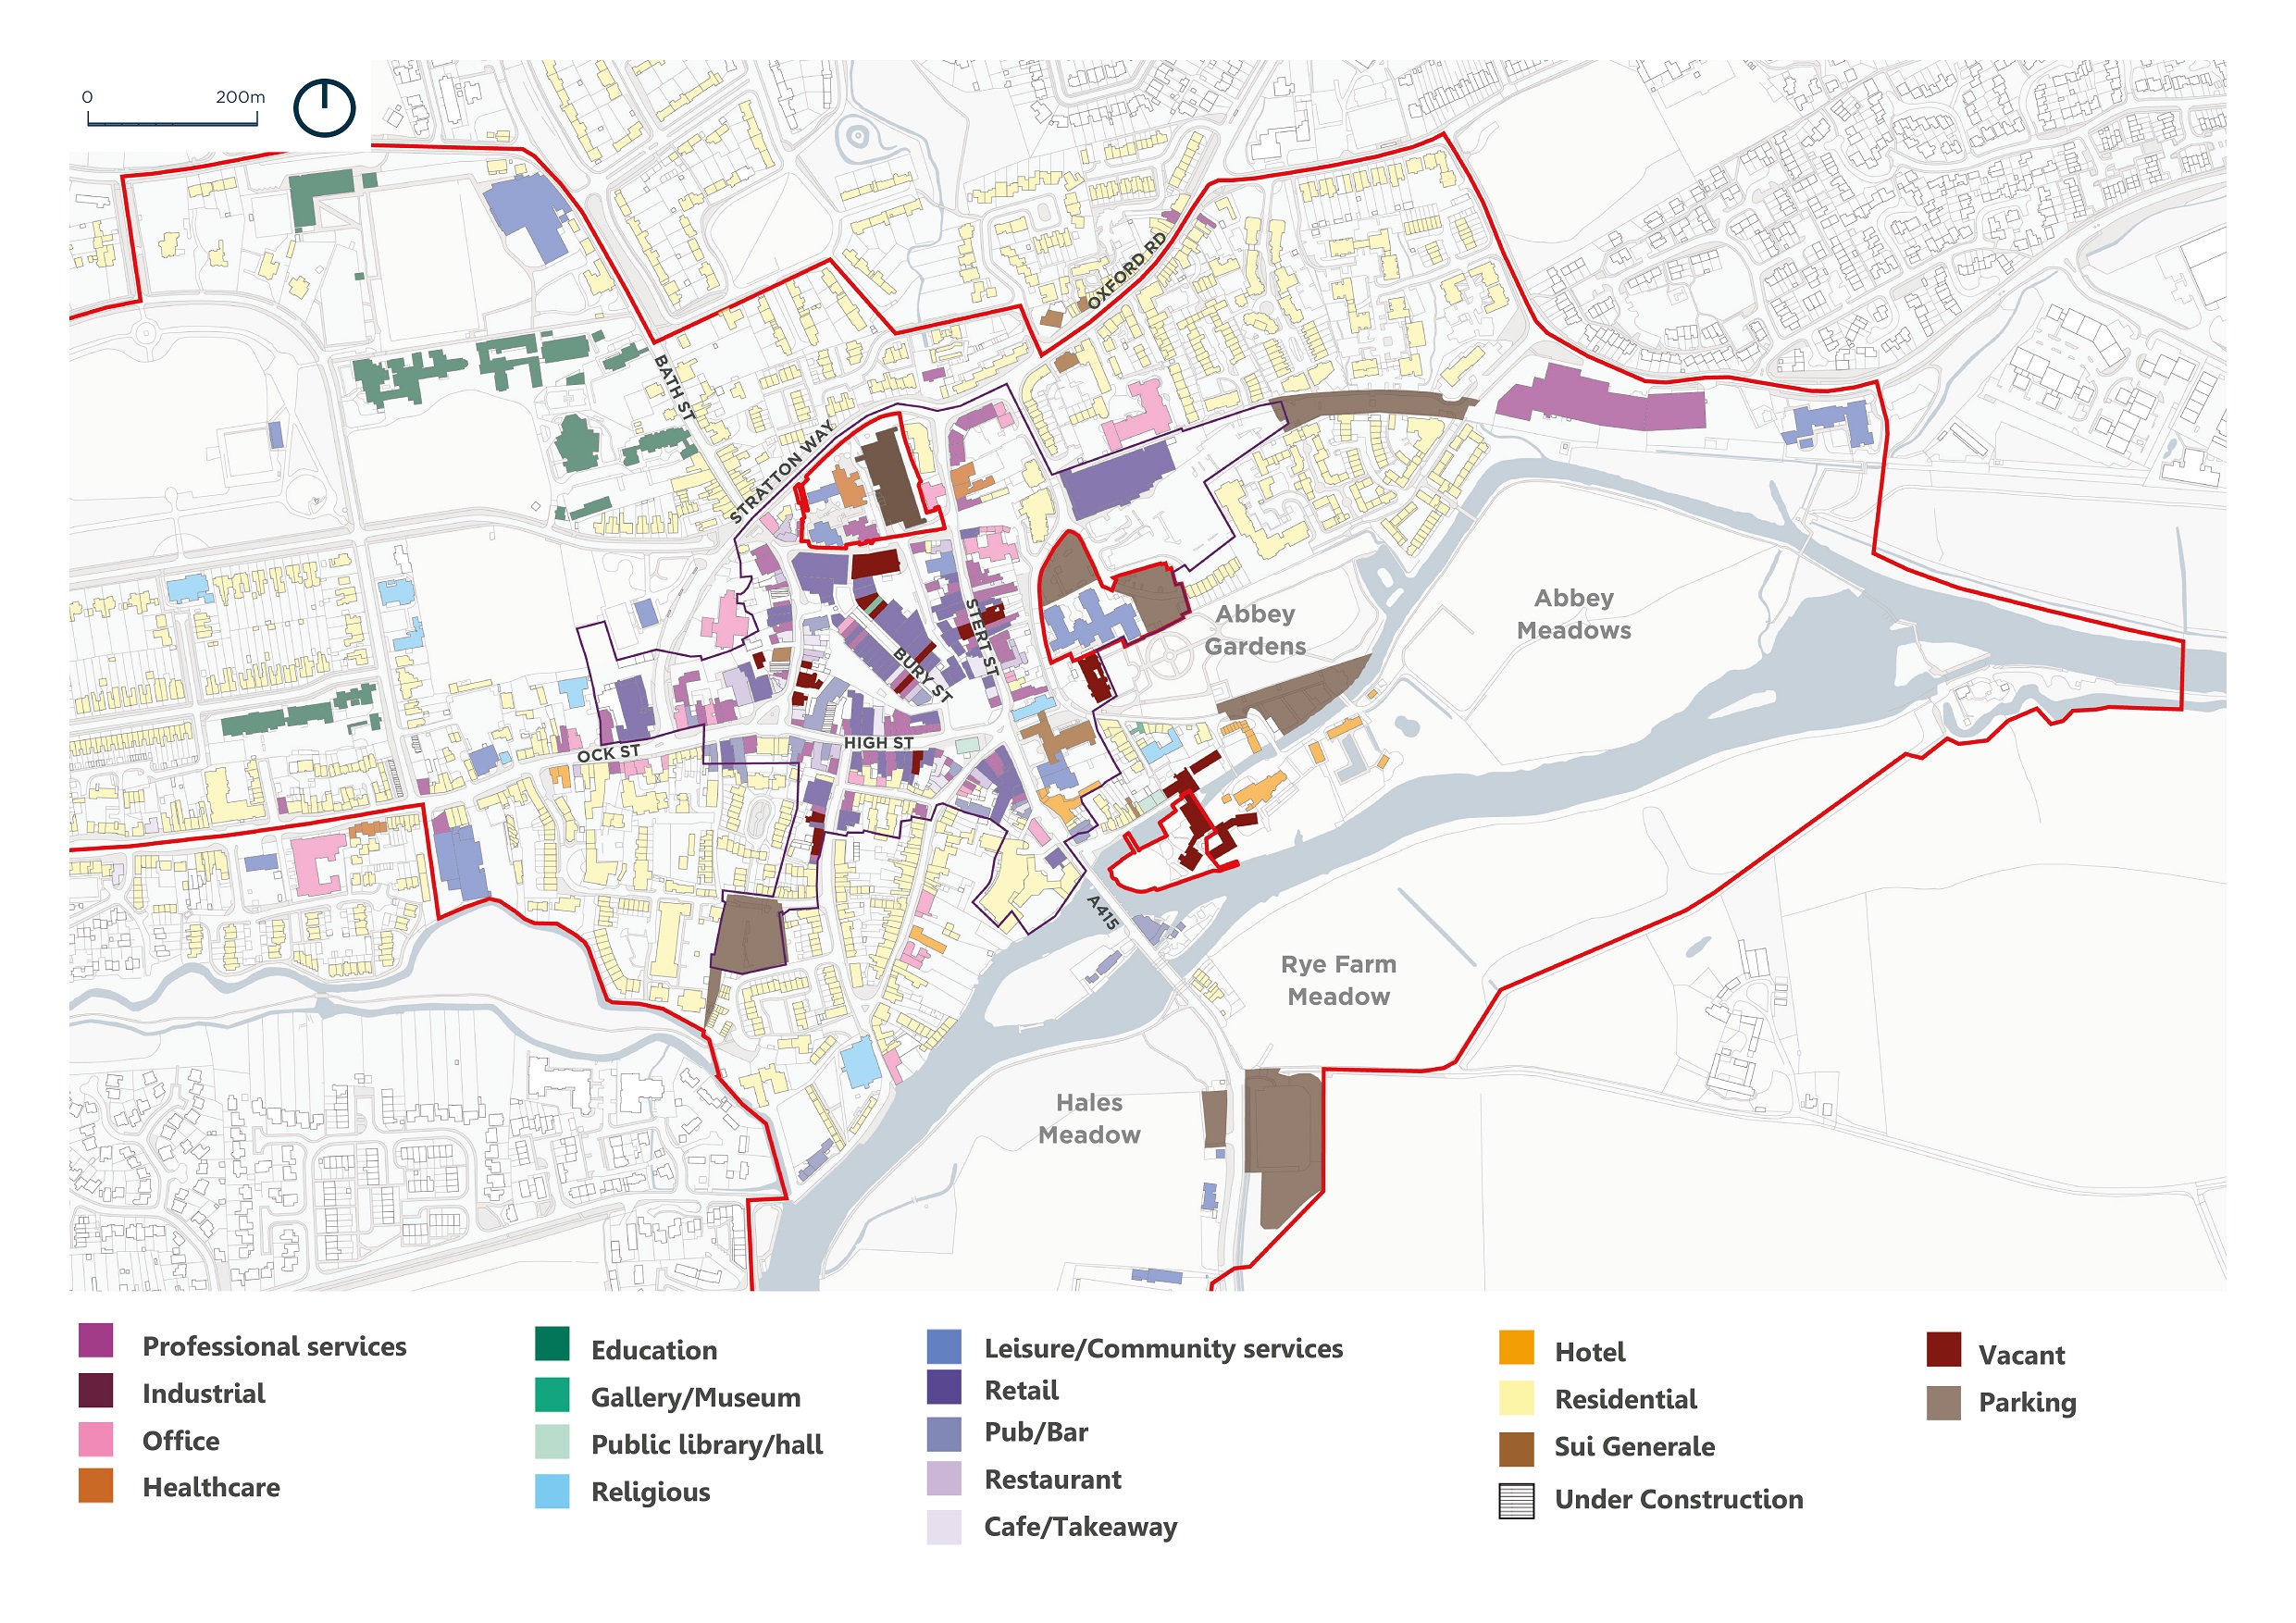 The plan illustrates the existing daytime land uses within the CARF. Uses identified within this area include professional services, industrial, office, healthcare, education, gallery/museum, public library or hall, religious, leisure and community service, retail, pubs or bars, restaurants, cafes or takeaway, hotel, residential, sui generale and vacant uses as well as locations for parking and buildings under construction.